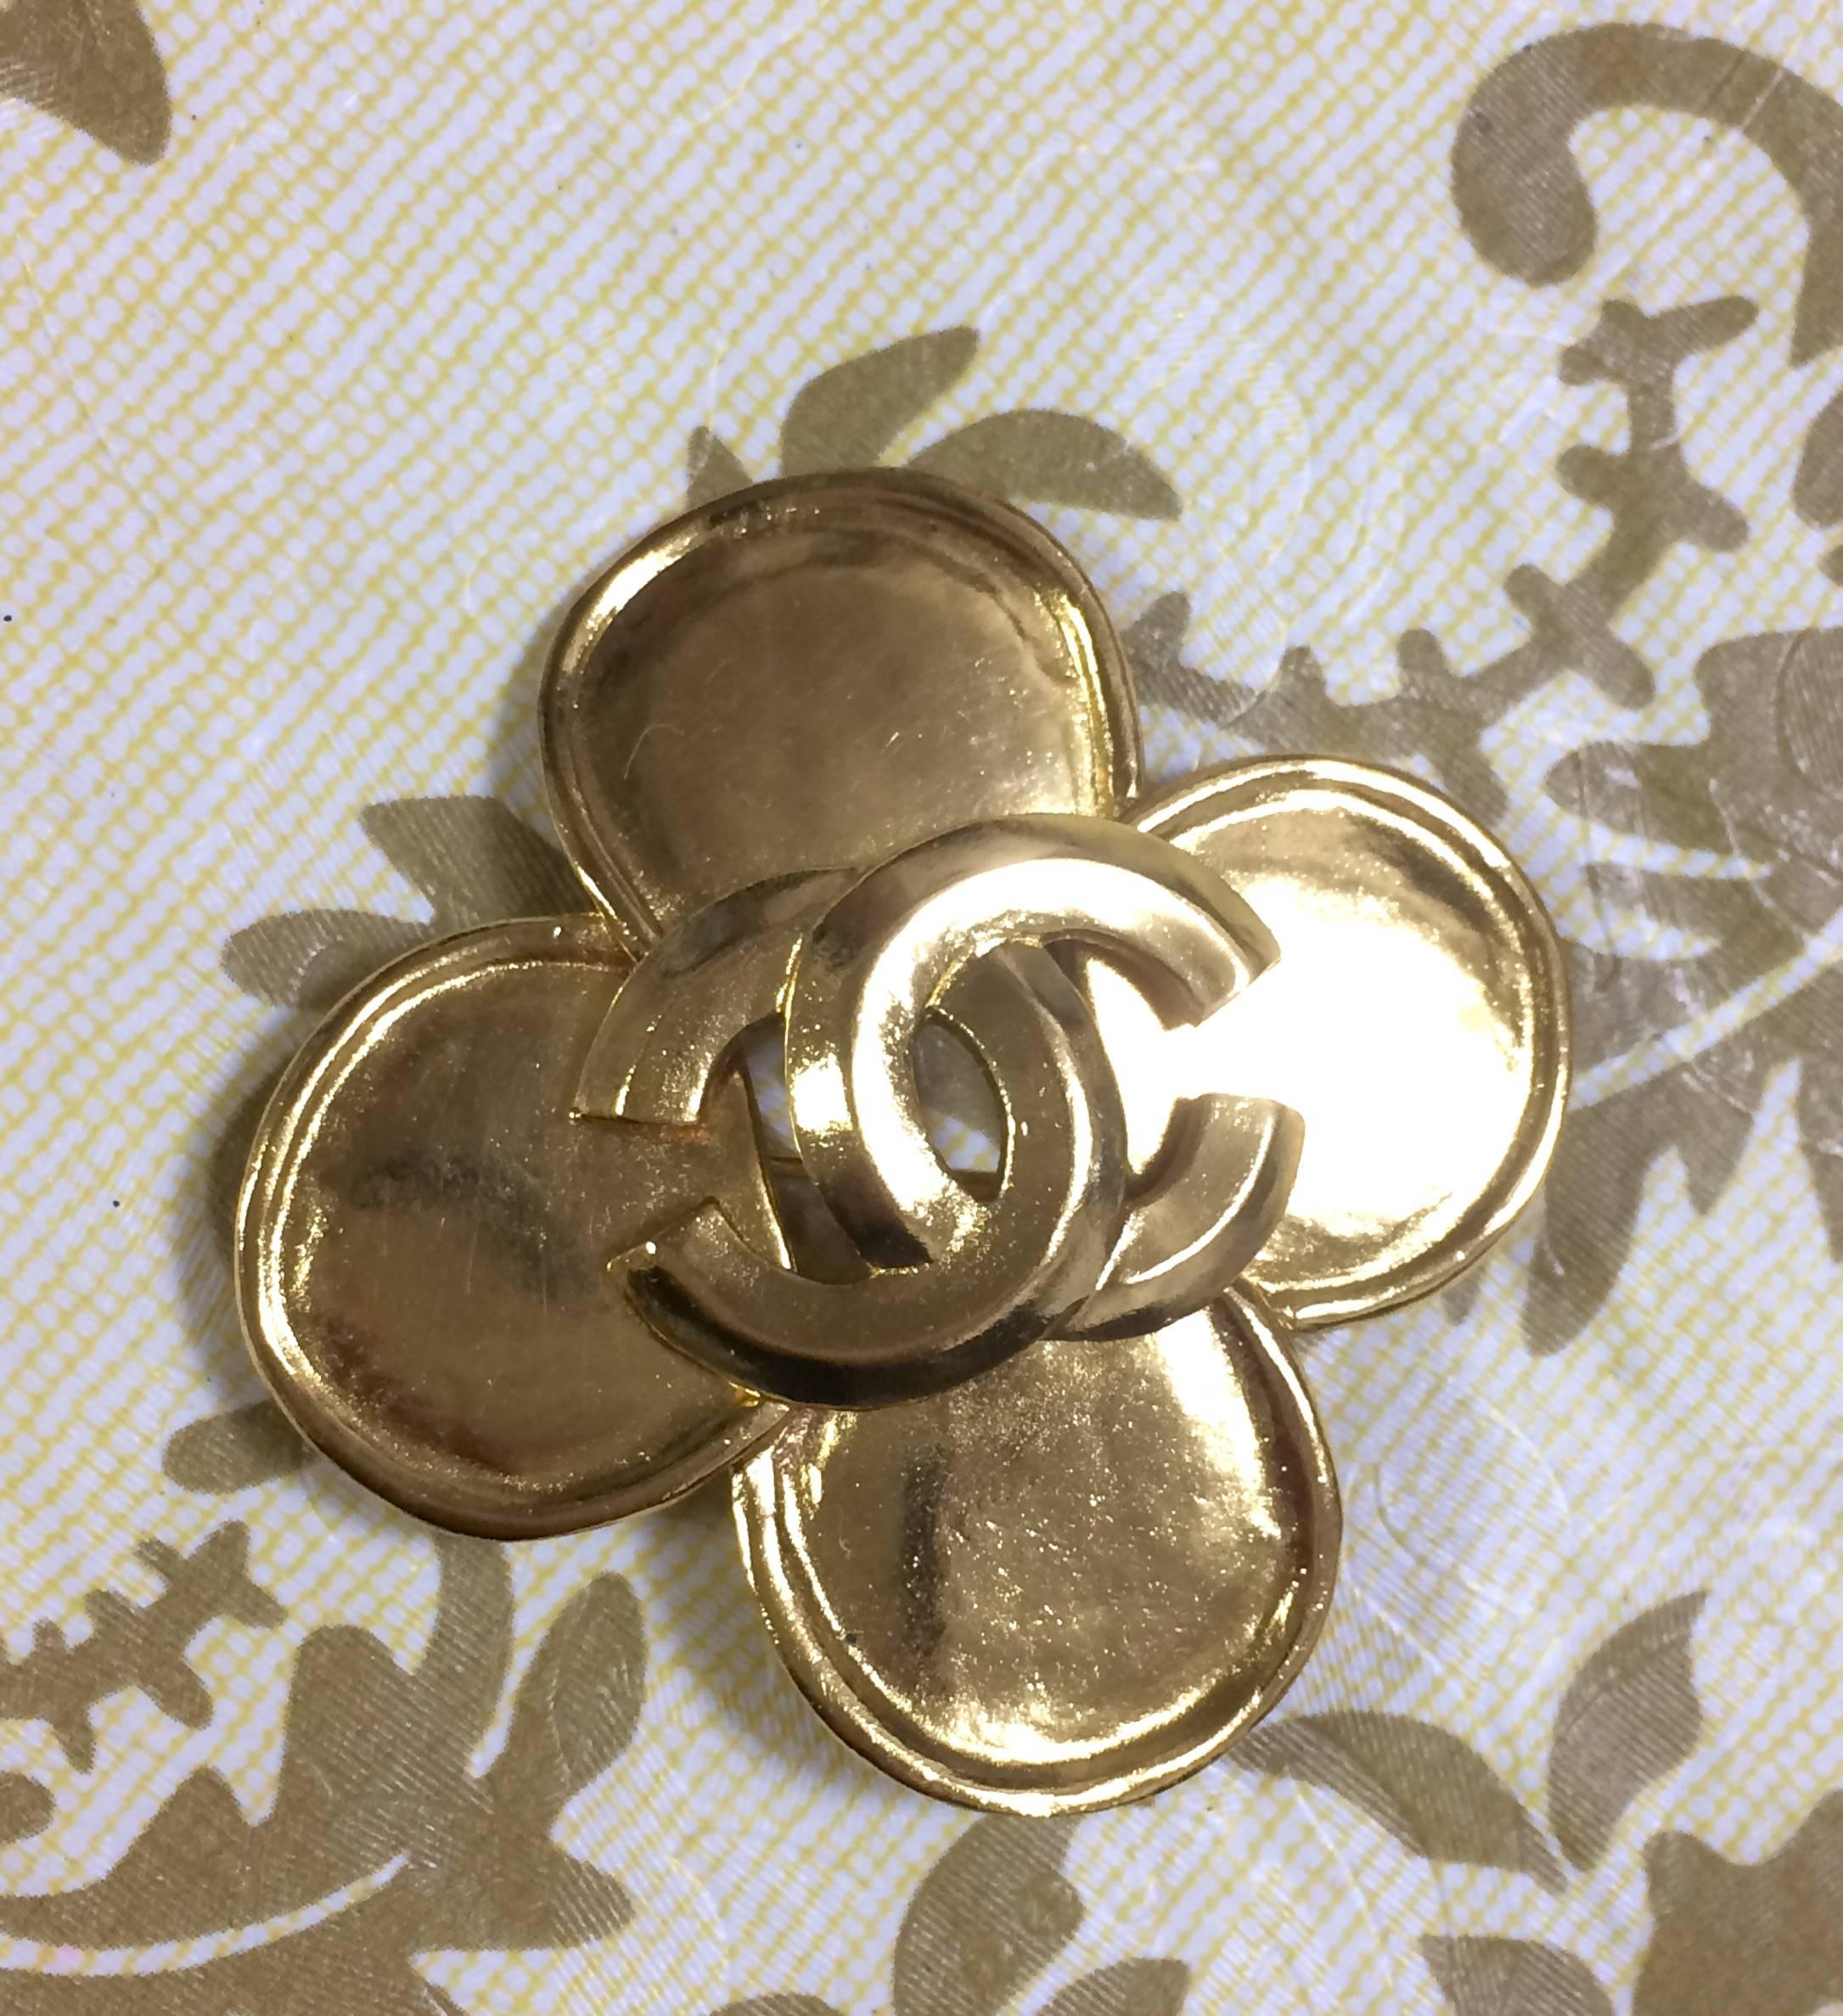 1990s. MINT. Vintage CHANEL Gold tone flower brooch with CC mark. Elegant and classic. Best vintage gift.

Introducing a 90's vintage Chanel brooch in 4 round petal flower shape with CC motif on it.

MINT/excellent vintage condition!

Classic